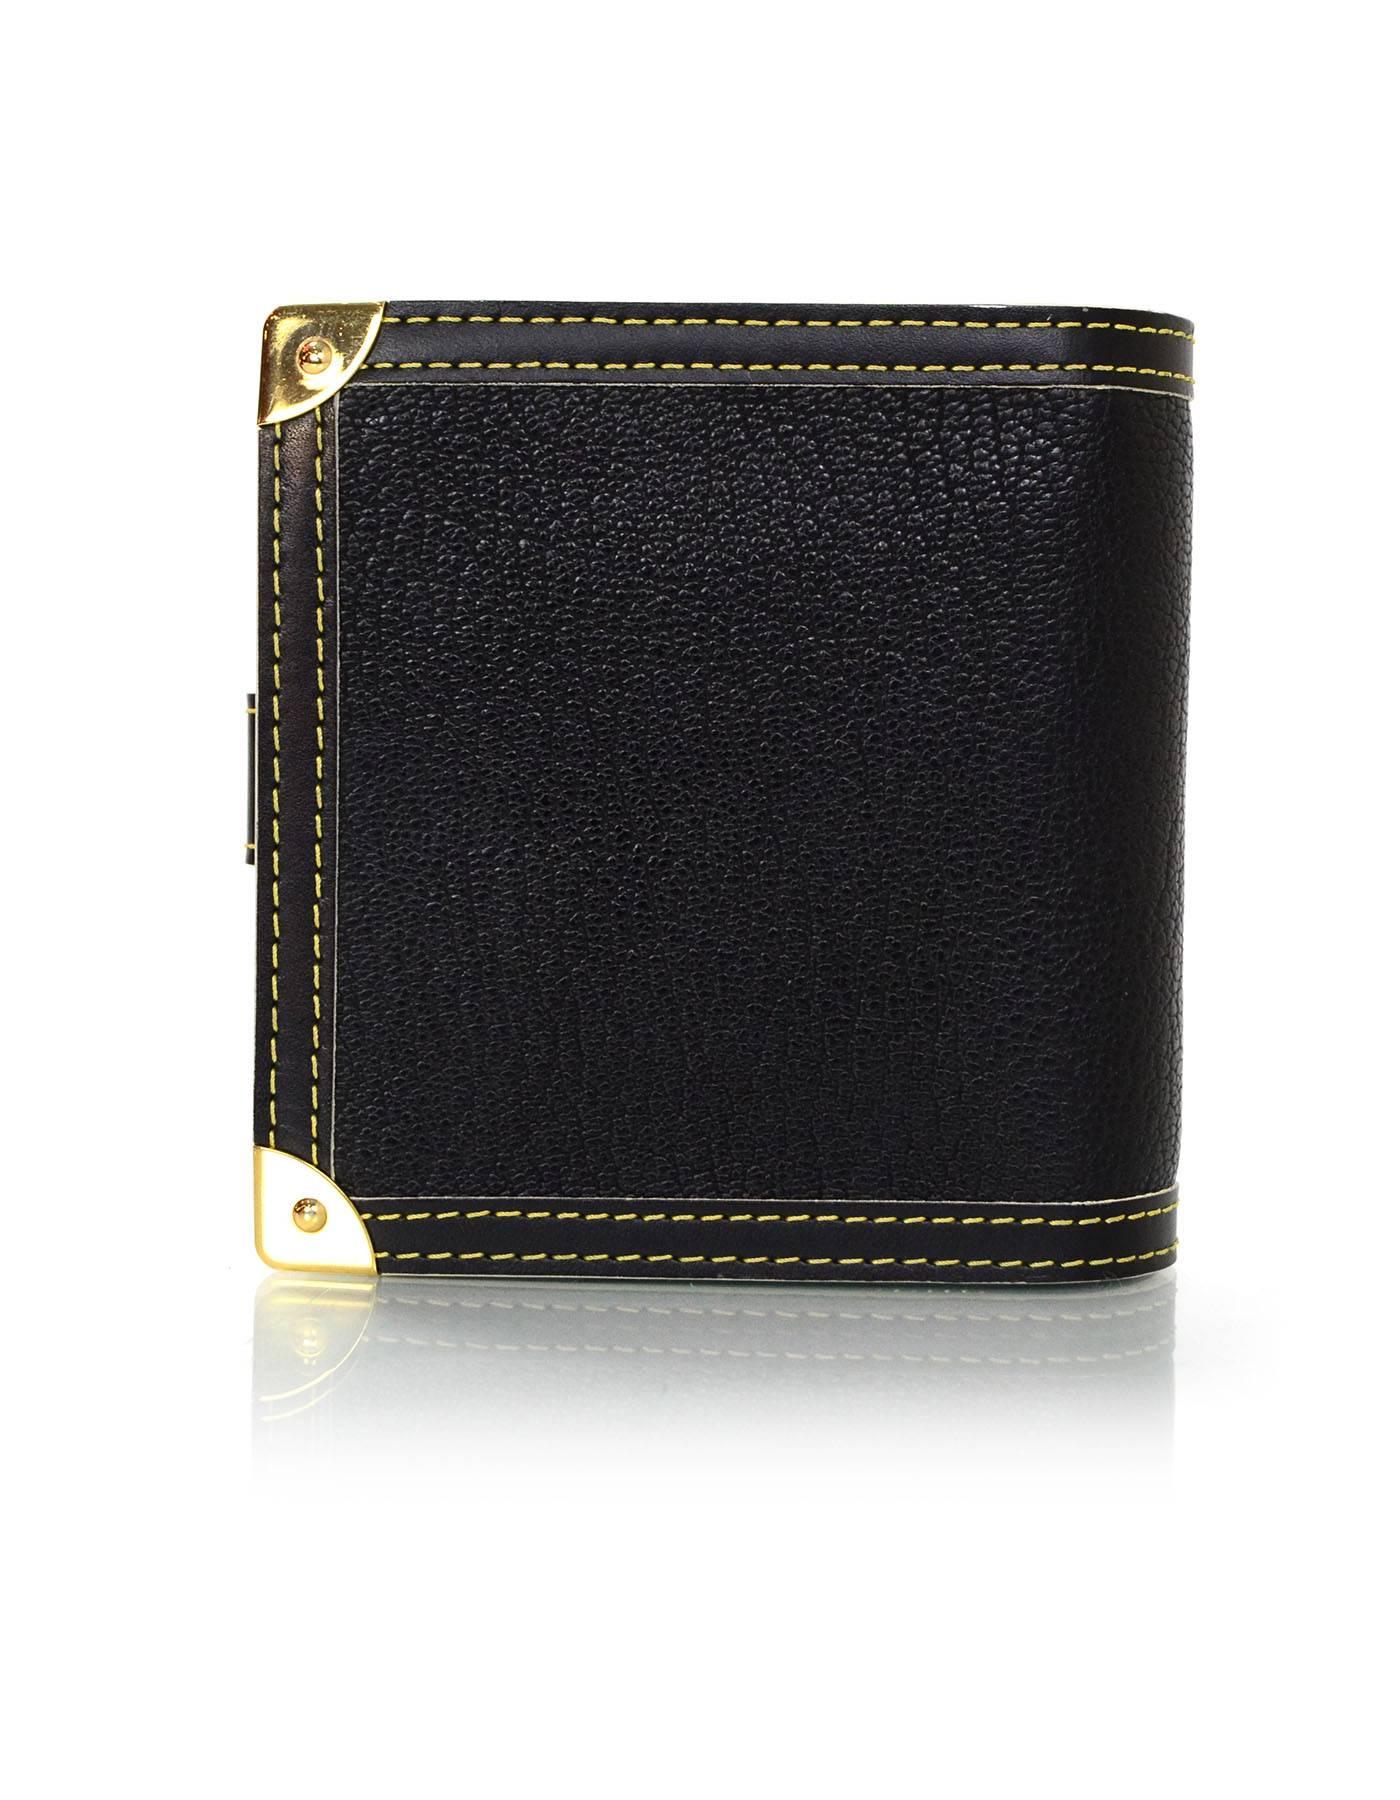 Louis Vuitton Black Leather Compact Suhali Wallet rt. $690 In Excellent Condition In New York, NY